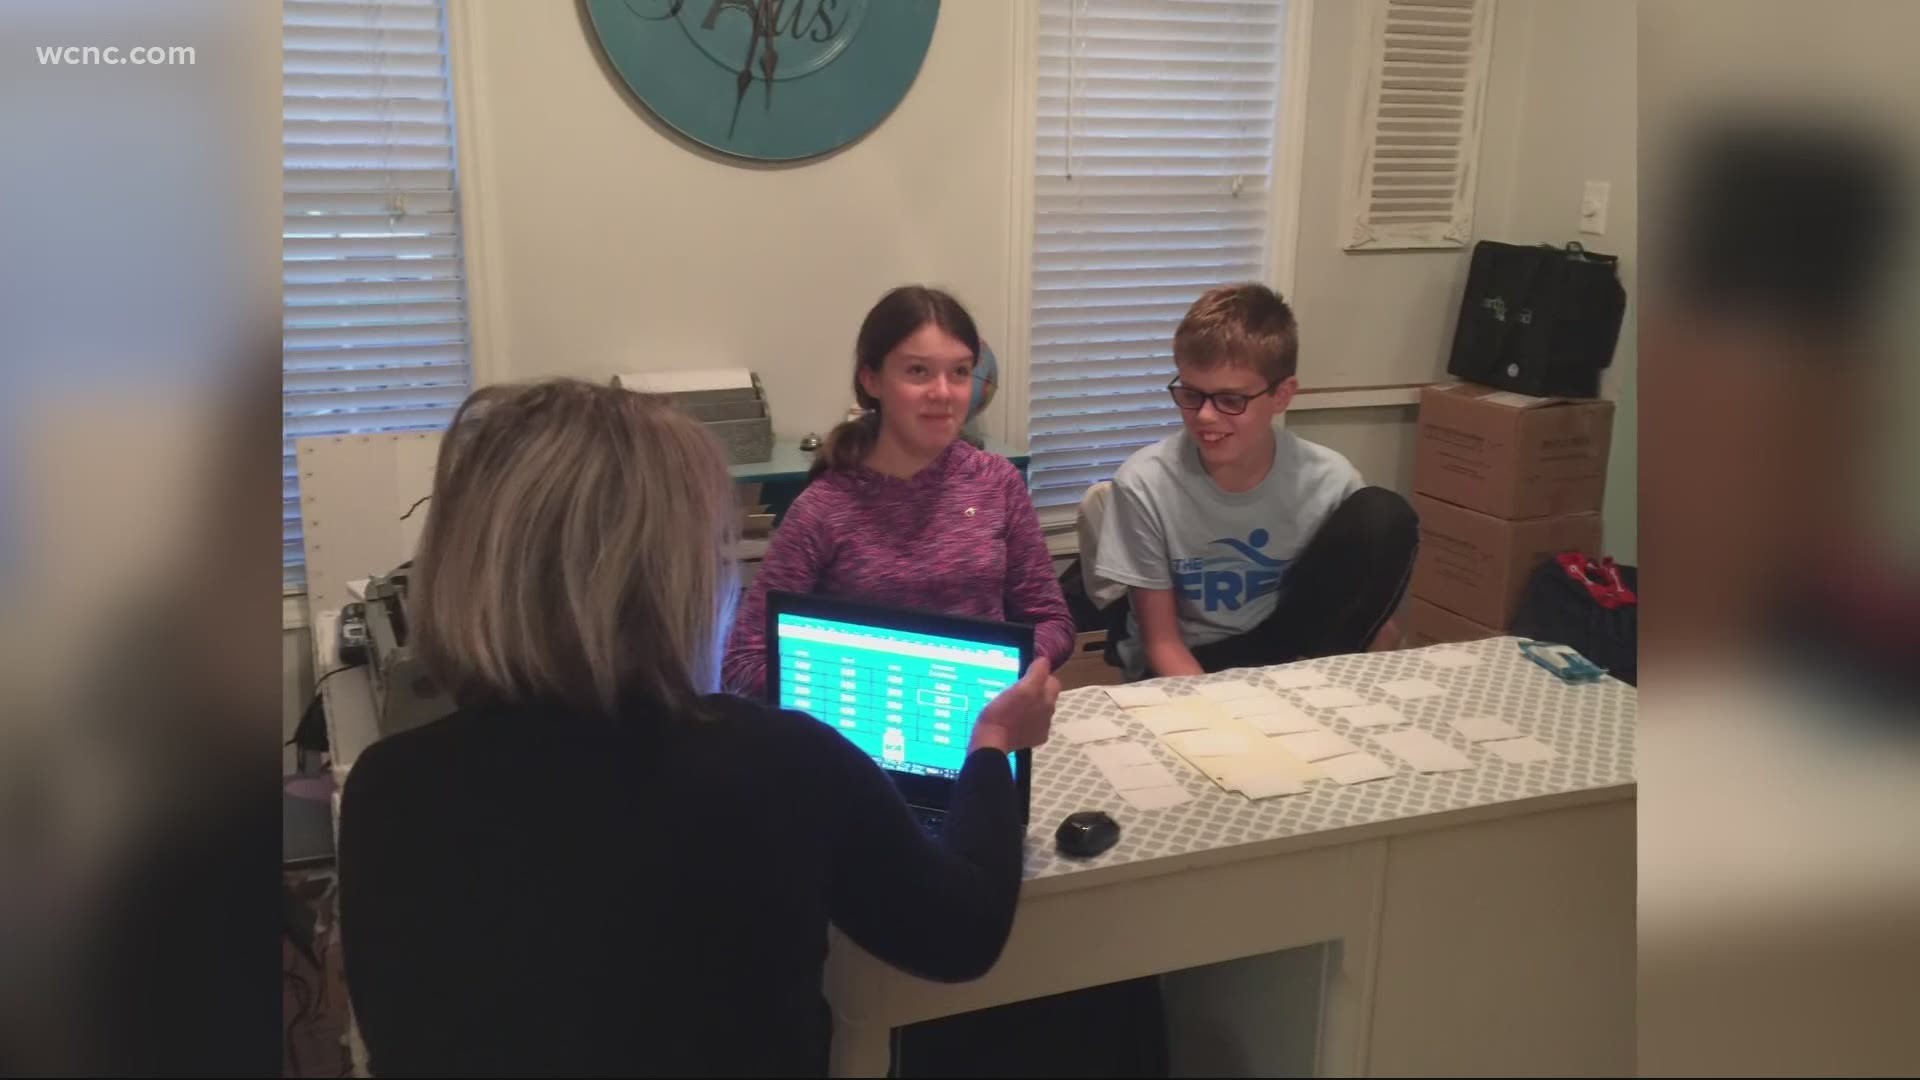 The Wilkerson family has been doing all virtual learning for five years.  They shared some tips to make this school year successful for others.